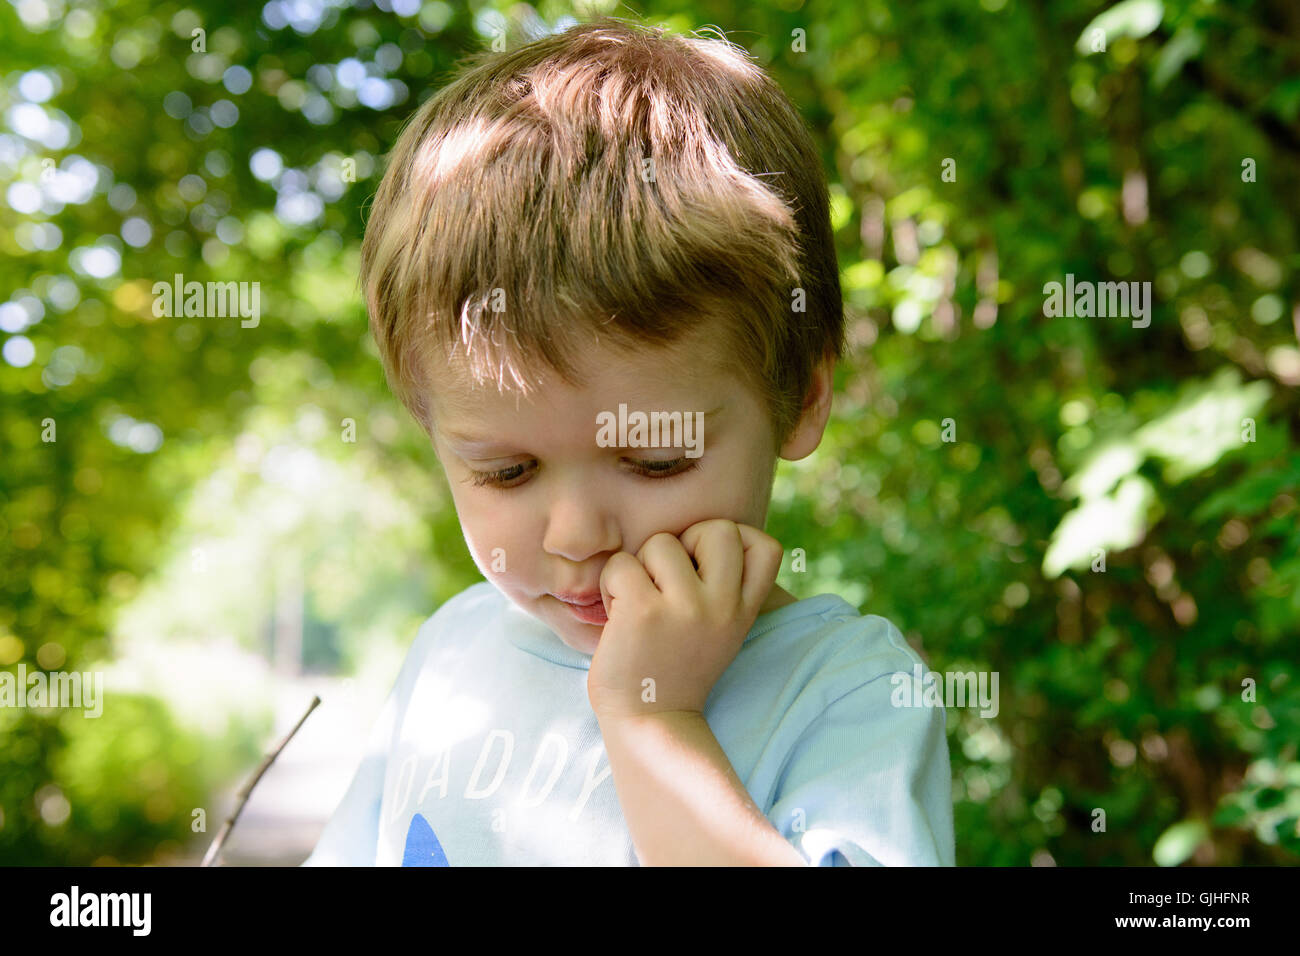 Boy standing in garden with hand on chin Stock Photo